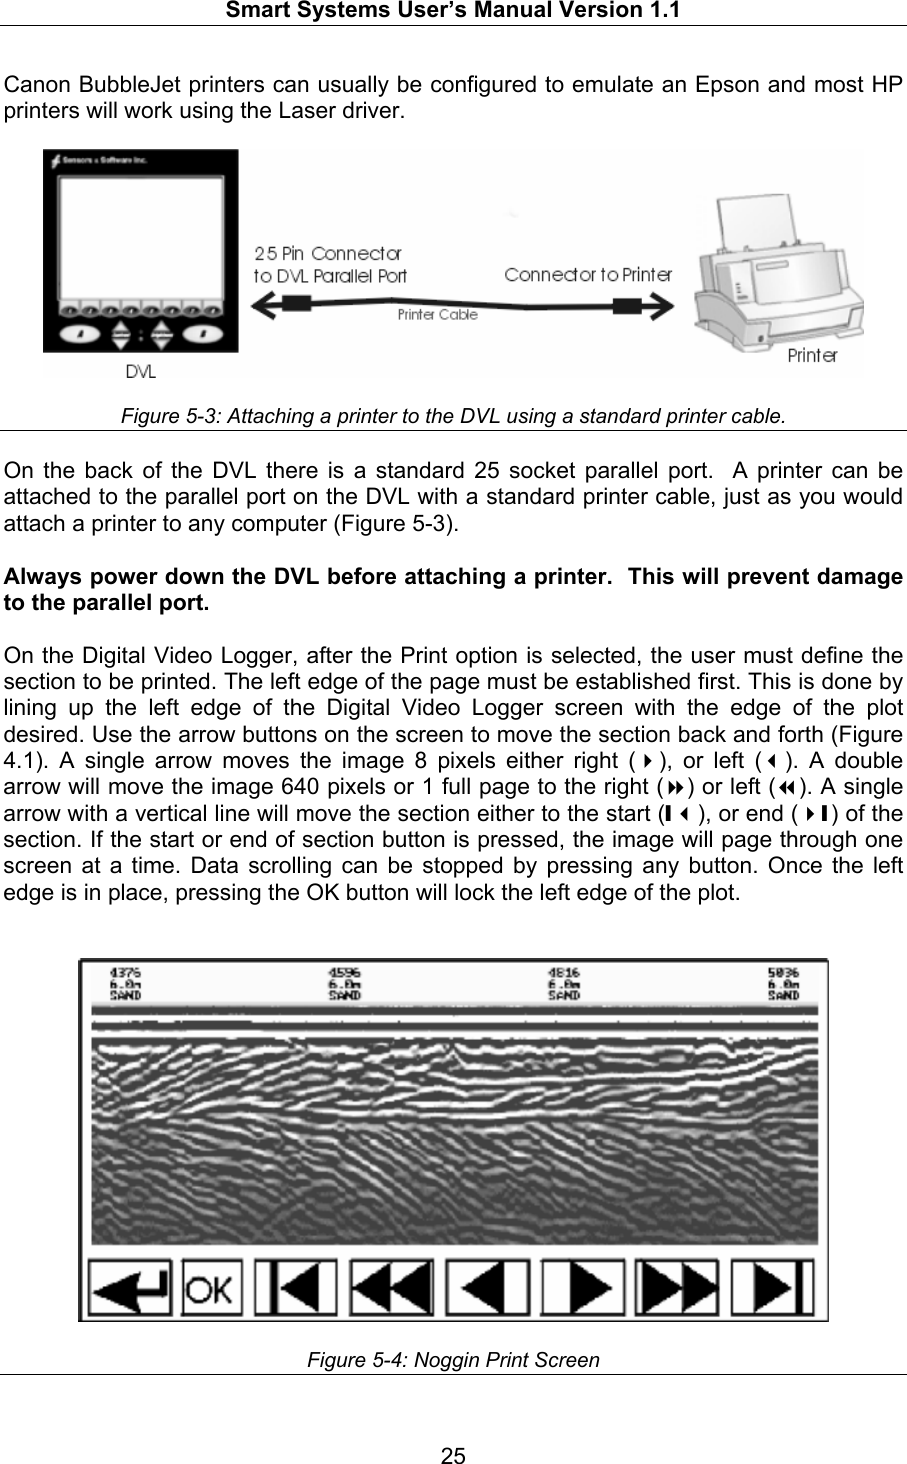   Smart Systems User’s Manual Version 1.1  25  Canon BubbleJet printers can usually be configured to emulate an Epson and most HP printers will work using the Laser driver.      Figure 5-3: Attaching a printer to the DVL using a standard printer cable.  On the back of the DVL there is a standard 25 socket parallel port.  A printer can be attached to the parallel port on the DVL with a standard printer cable, just as you would attach a printer to any computer (Figure 5-3).  Always power down the DVL before attaching a printer.  This will prevent damage to the parallel port.  On the Digital Video Logger, after the Print option is selected, the user must define the section to be printed. The left edge of the page must be established first. This is done by lining up the left edge of the Digital Video Logger screen with the edge of the plot desired. Use the arrow buttons on the screen to move the section back and forth (Figure 4.1). A single arrow moves the image 8 pixels either right (), or left (). A double arrow will move the image 640 pixels or 1 full page to the right () or left (). A single arrow with a vertical line will move the section either to the start (❙), or end (❙) of the section. If the start or end of section button is pressed, the image will page through one screen at a time. Data scrolling can be stopped by pressing any button. Once the left edge is in place, pressing the OK button will lock the left edge of the plot.     Figure 5-4: Noggin Print Screen  